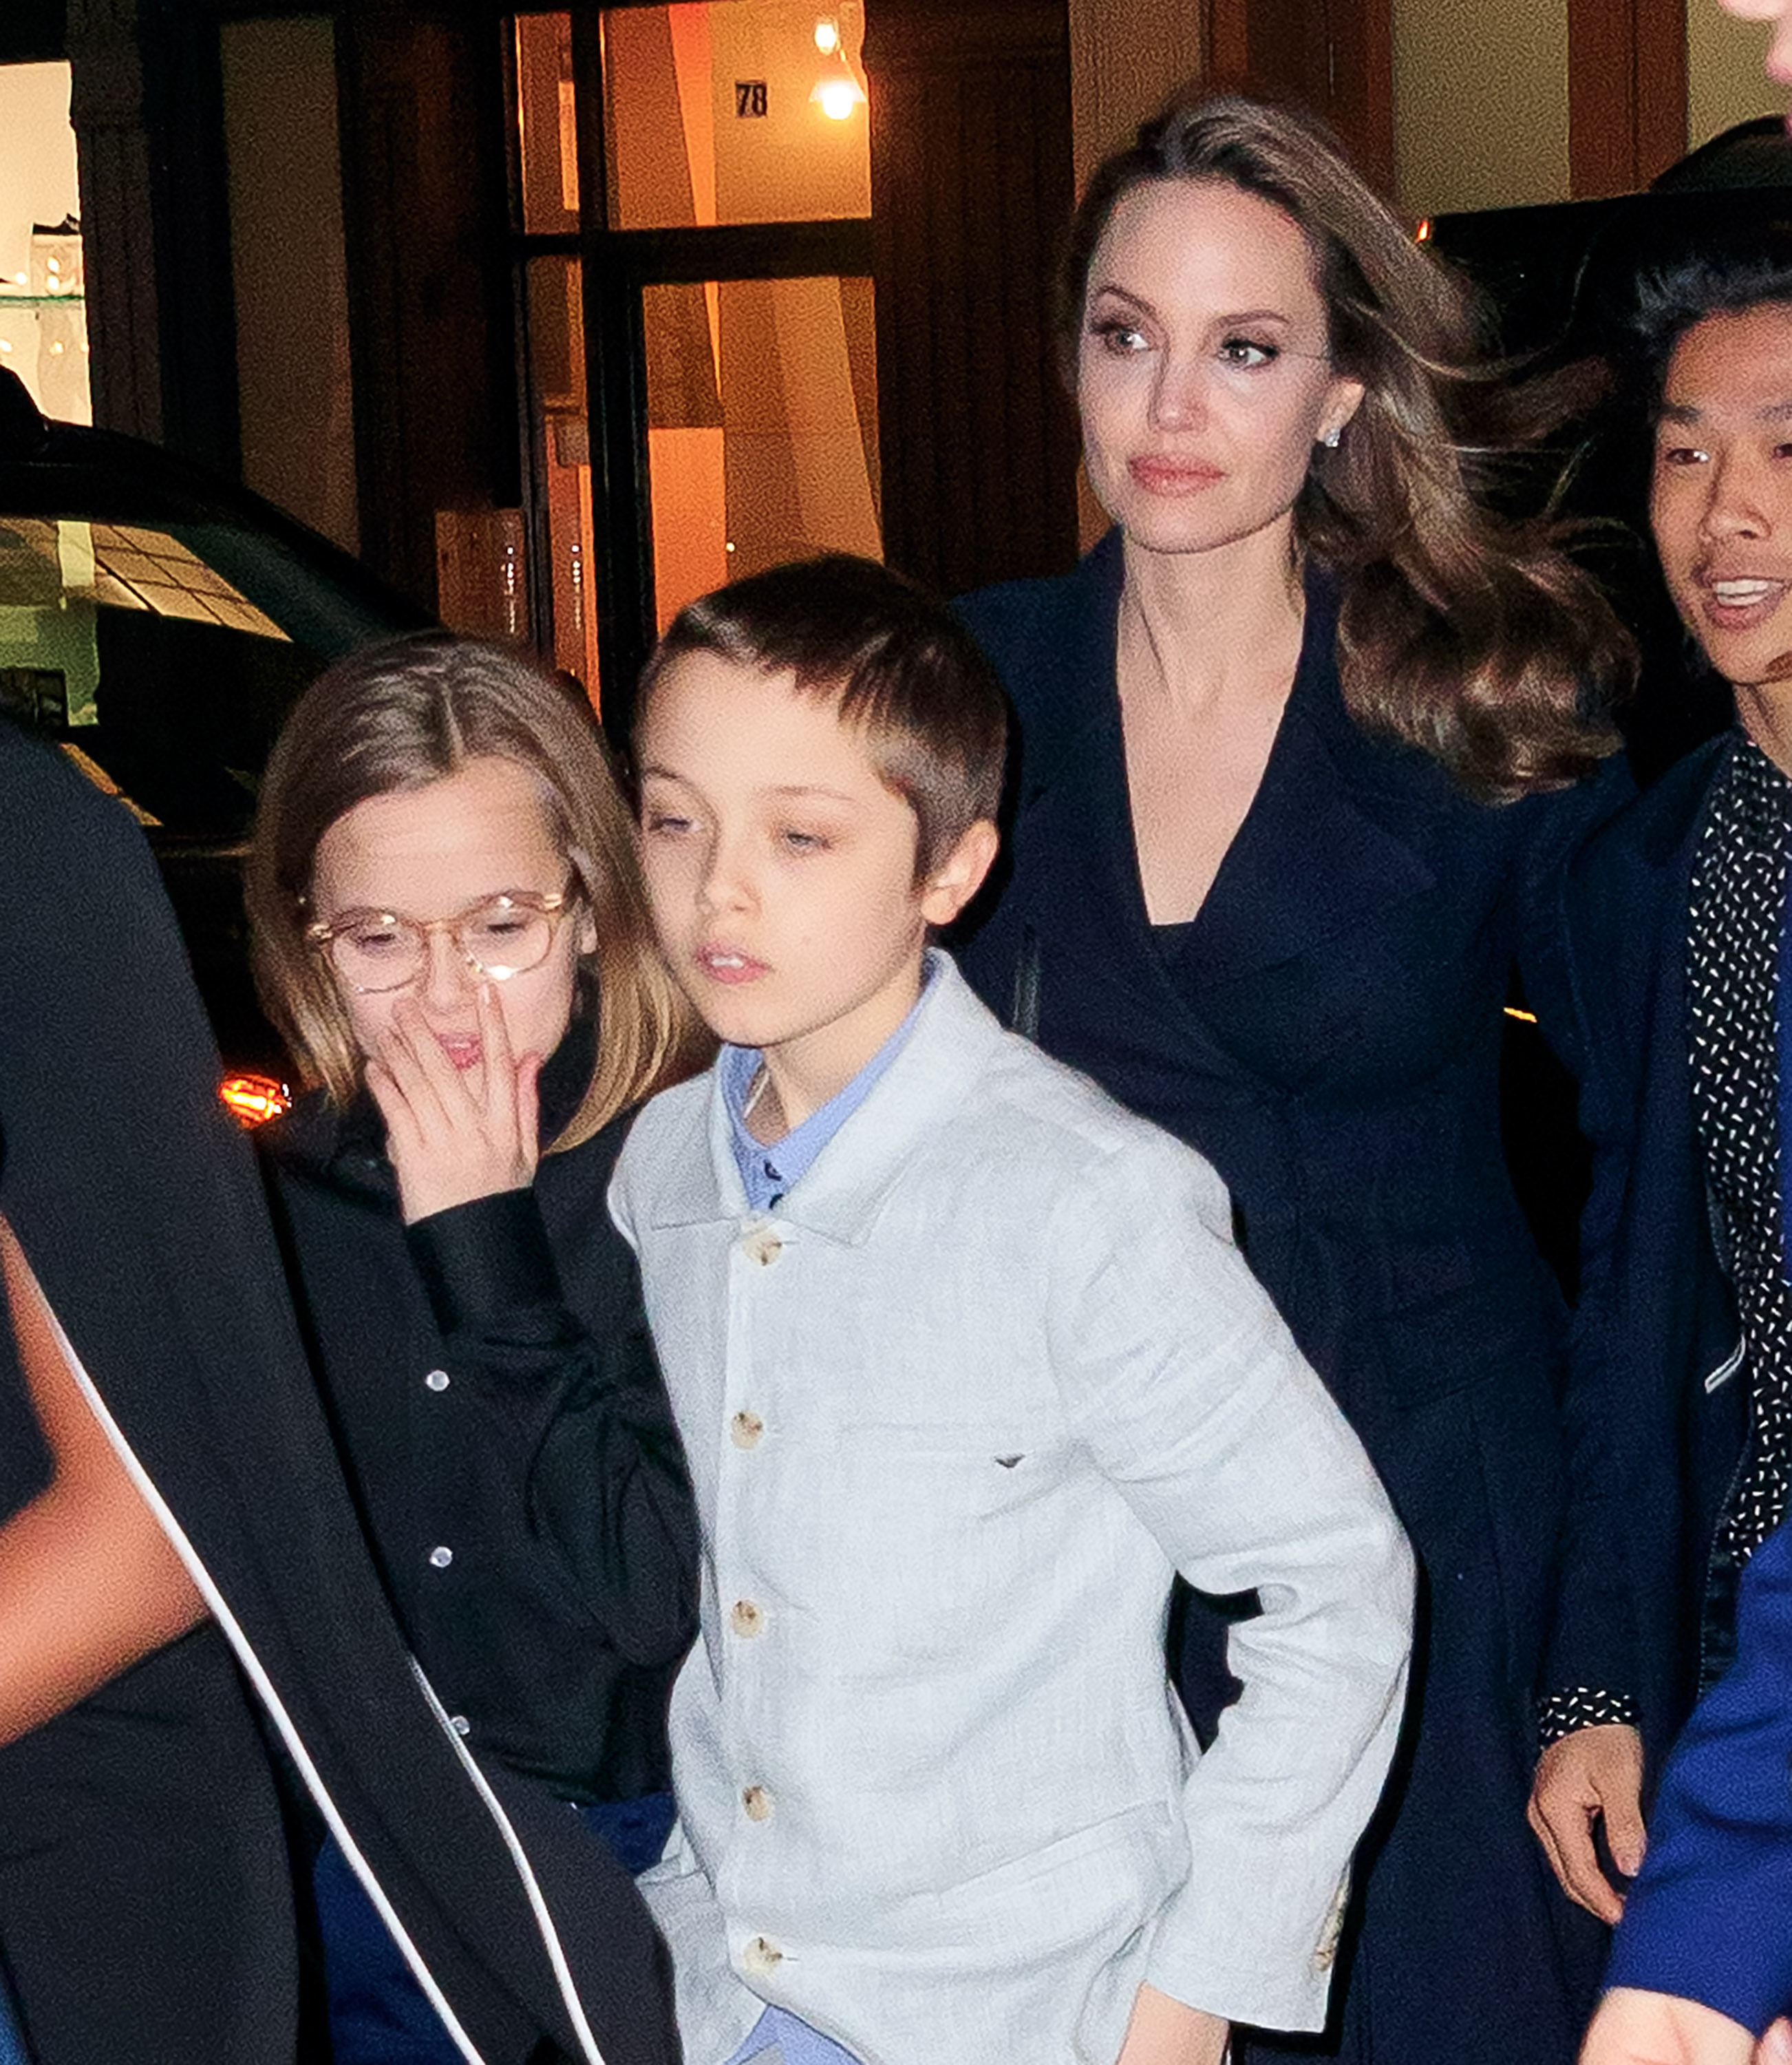 Angelina Jolie, Maddox Jolie-Pitt, and twins, Vivienne Jolie-Pitt and Knox Jolie-Pitt attended "The Boy Who Harnessed the Wind" screening in NYC, February 25, 2019. | Source: Getty Images